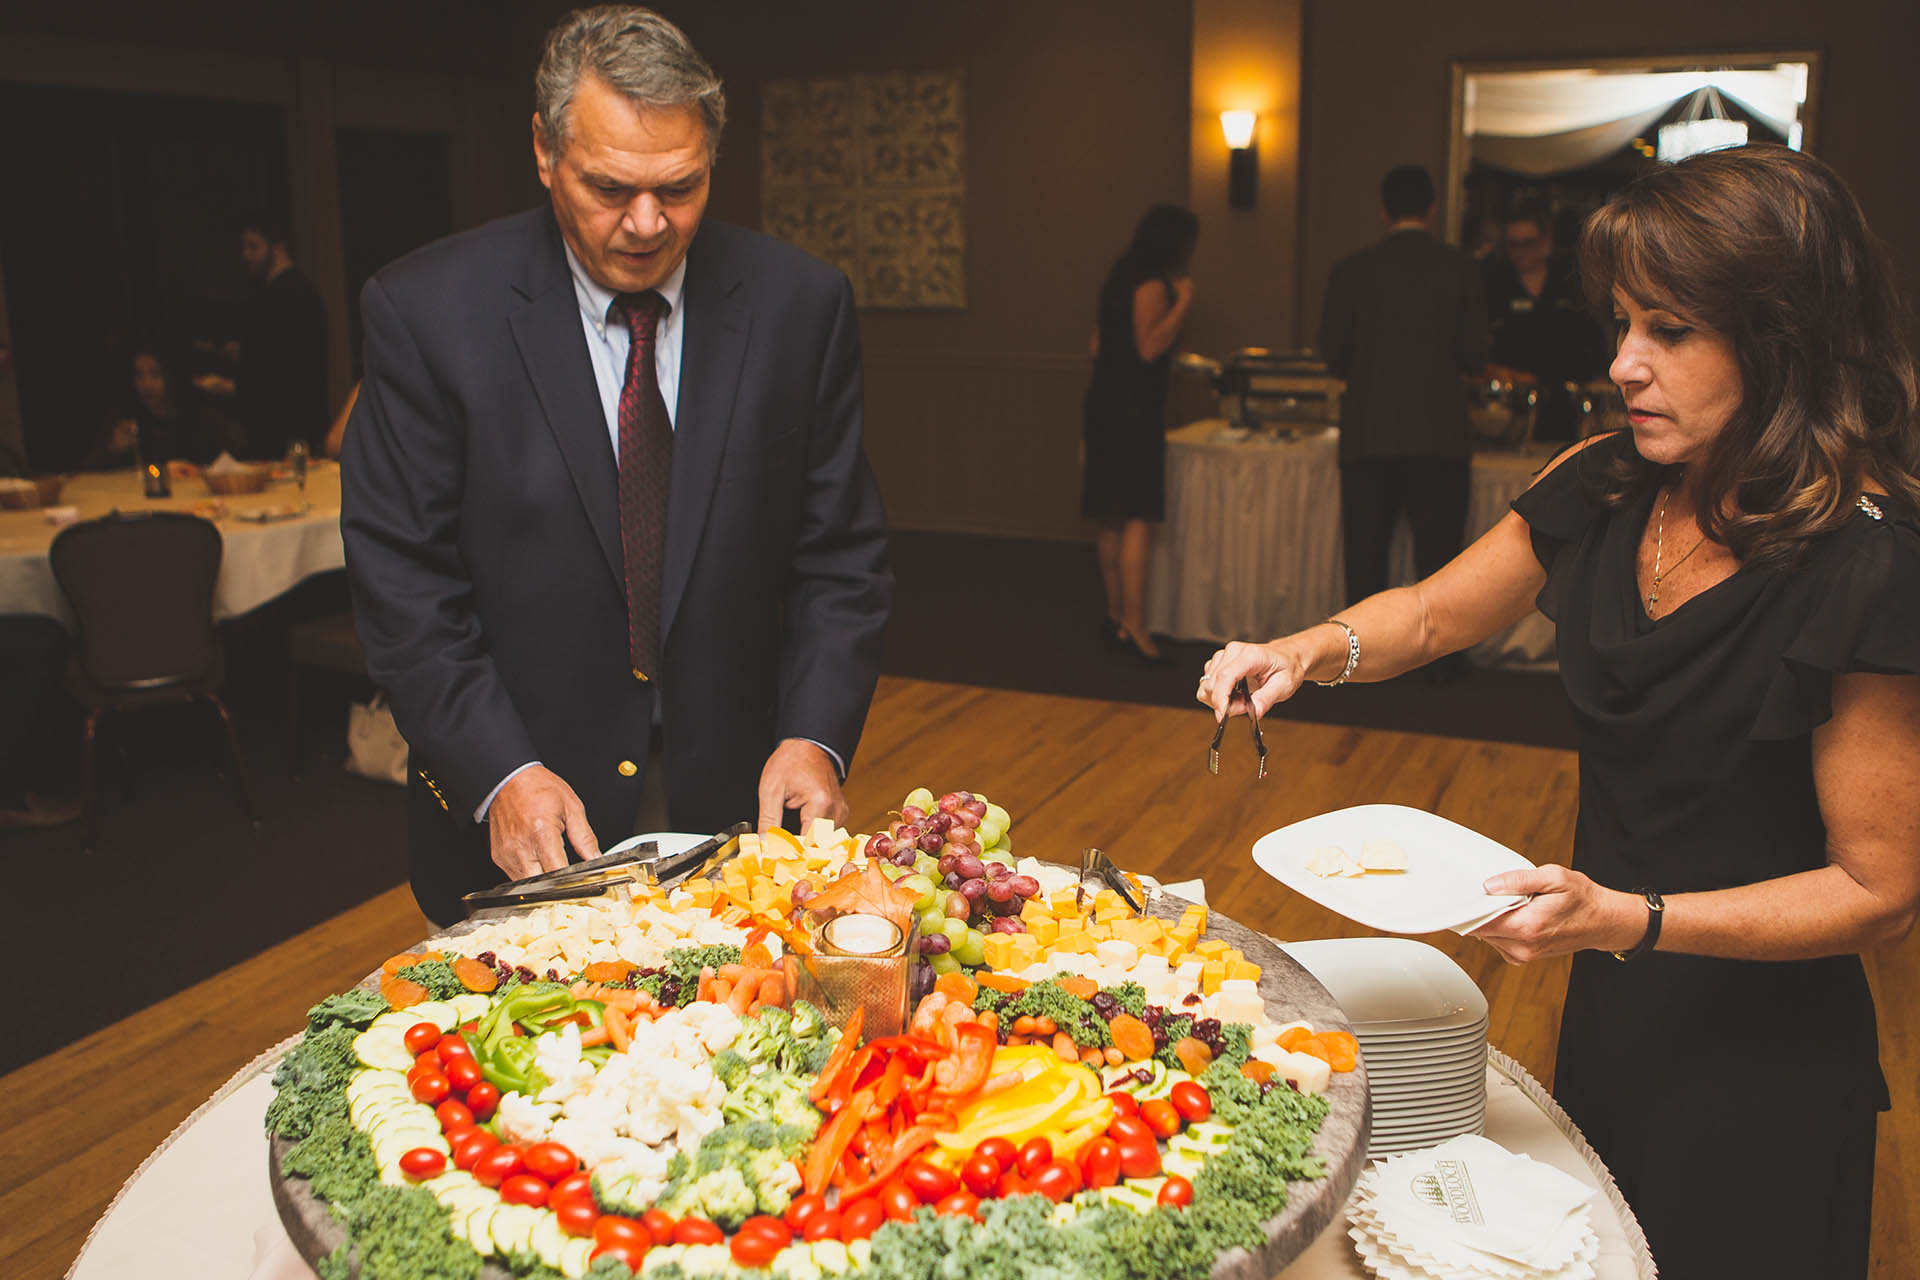 Wedding reception guests picking vegetables from large veggie tray.